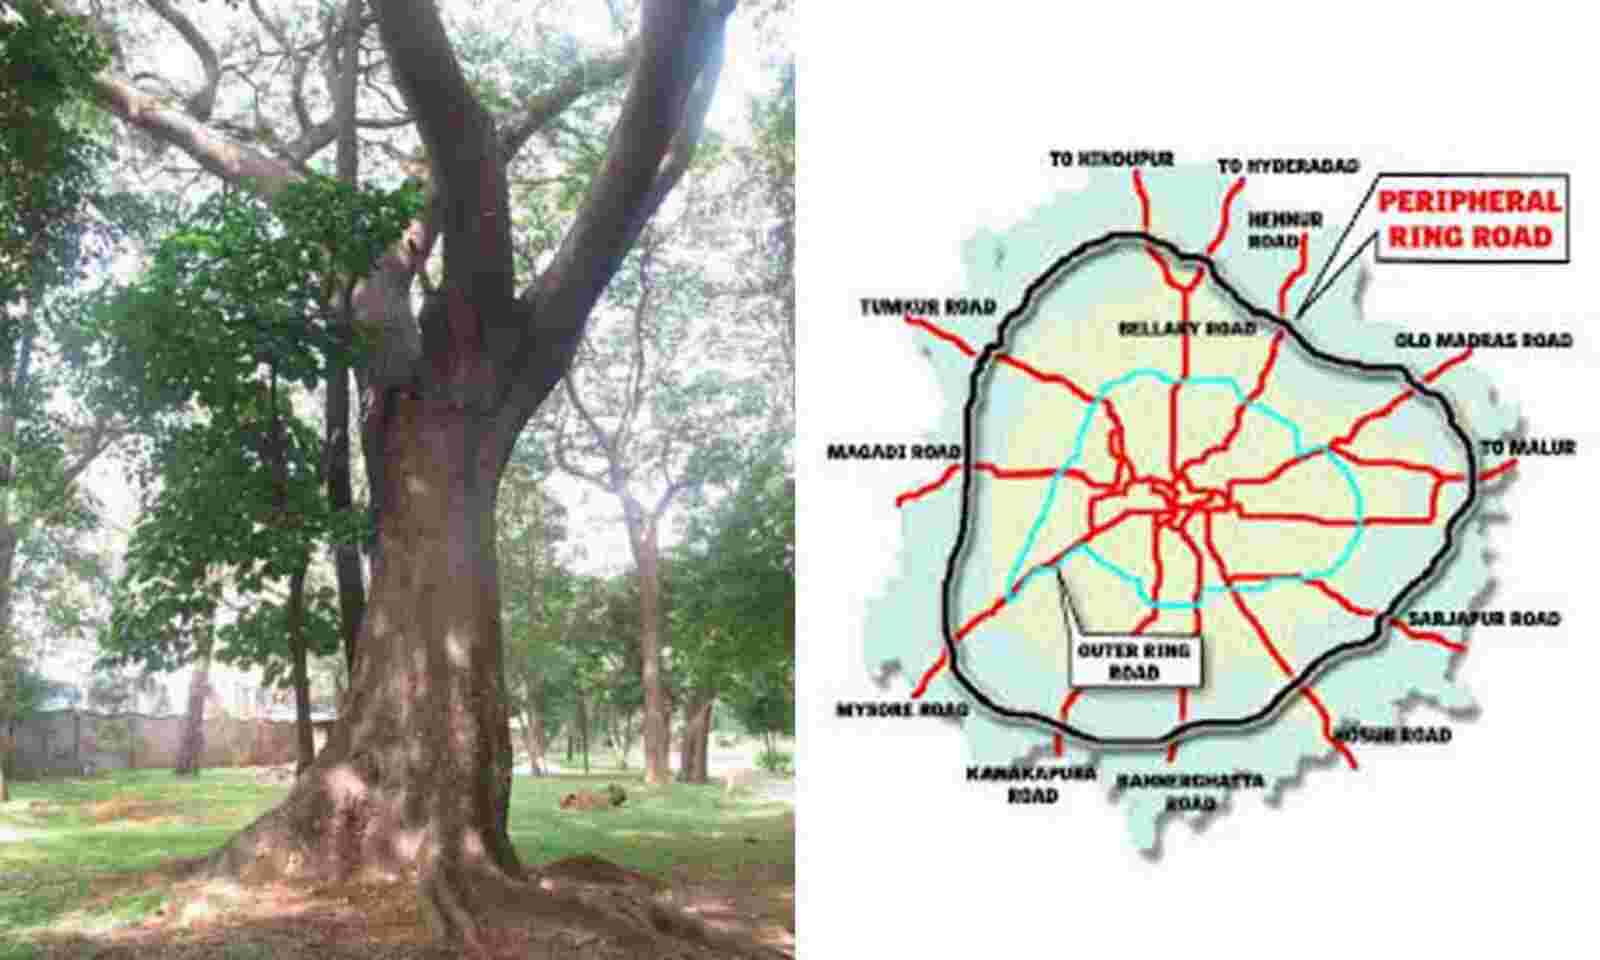 Reimagining the peripheral ring road of Bengaluru as an area development  Project | Semantic Scholar